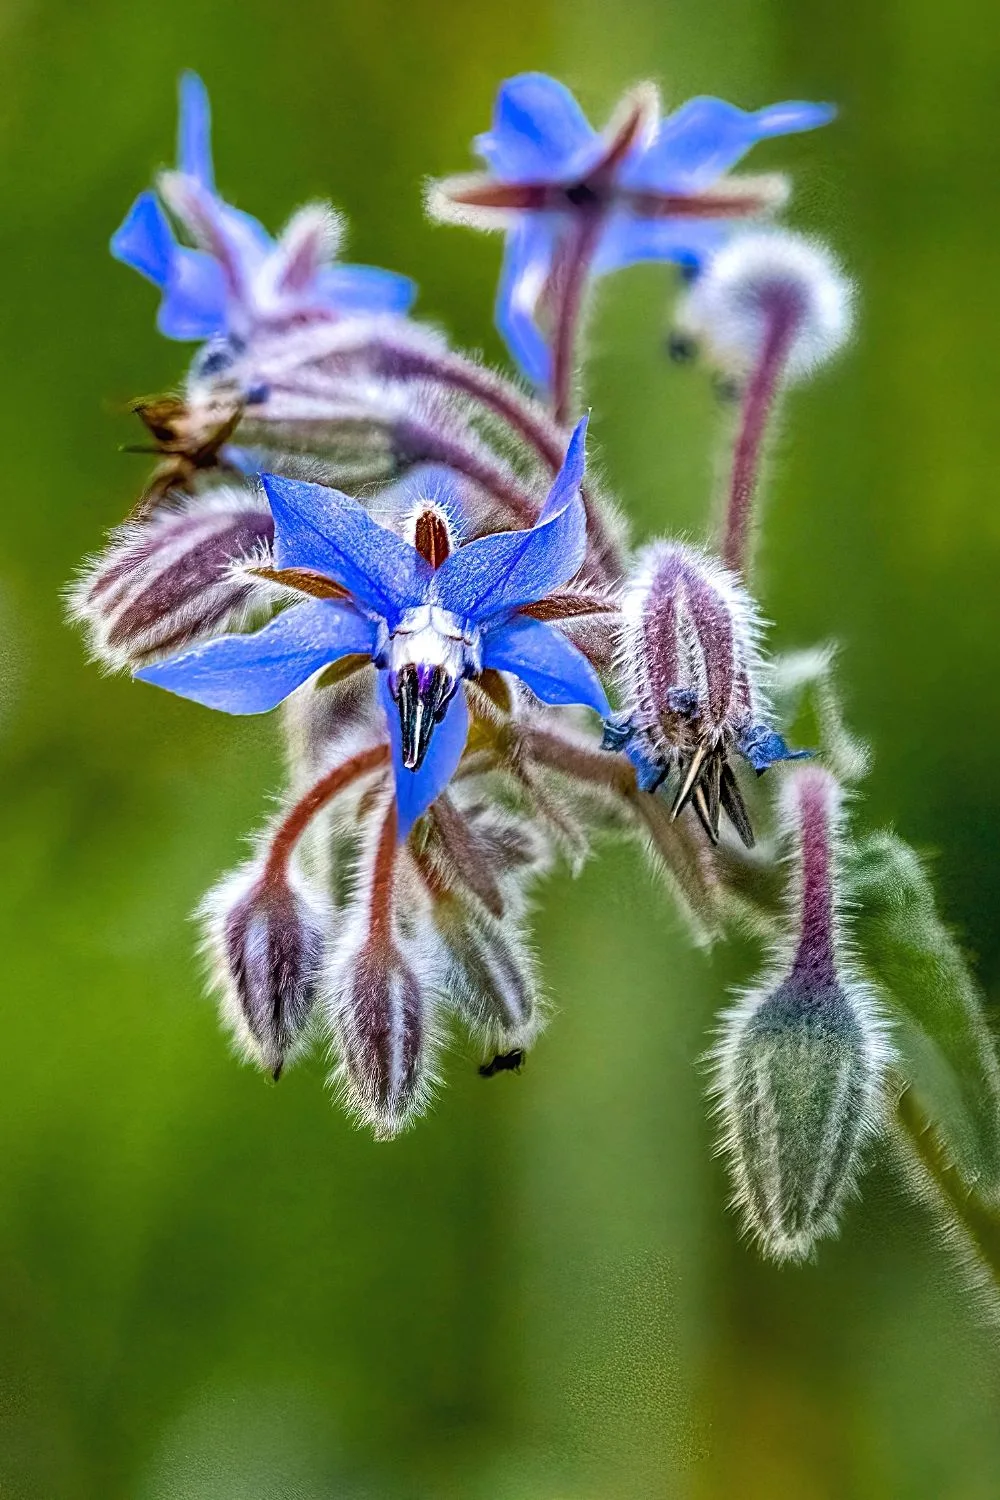 Borage has unique flowers and stems in that they have hair-like projections on them, a perfect fit to your southeast facing garden